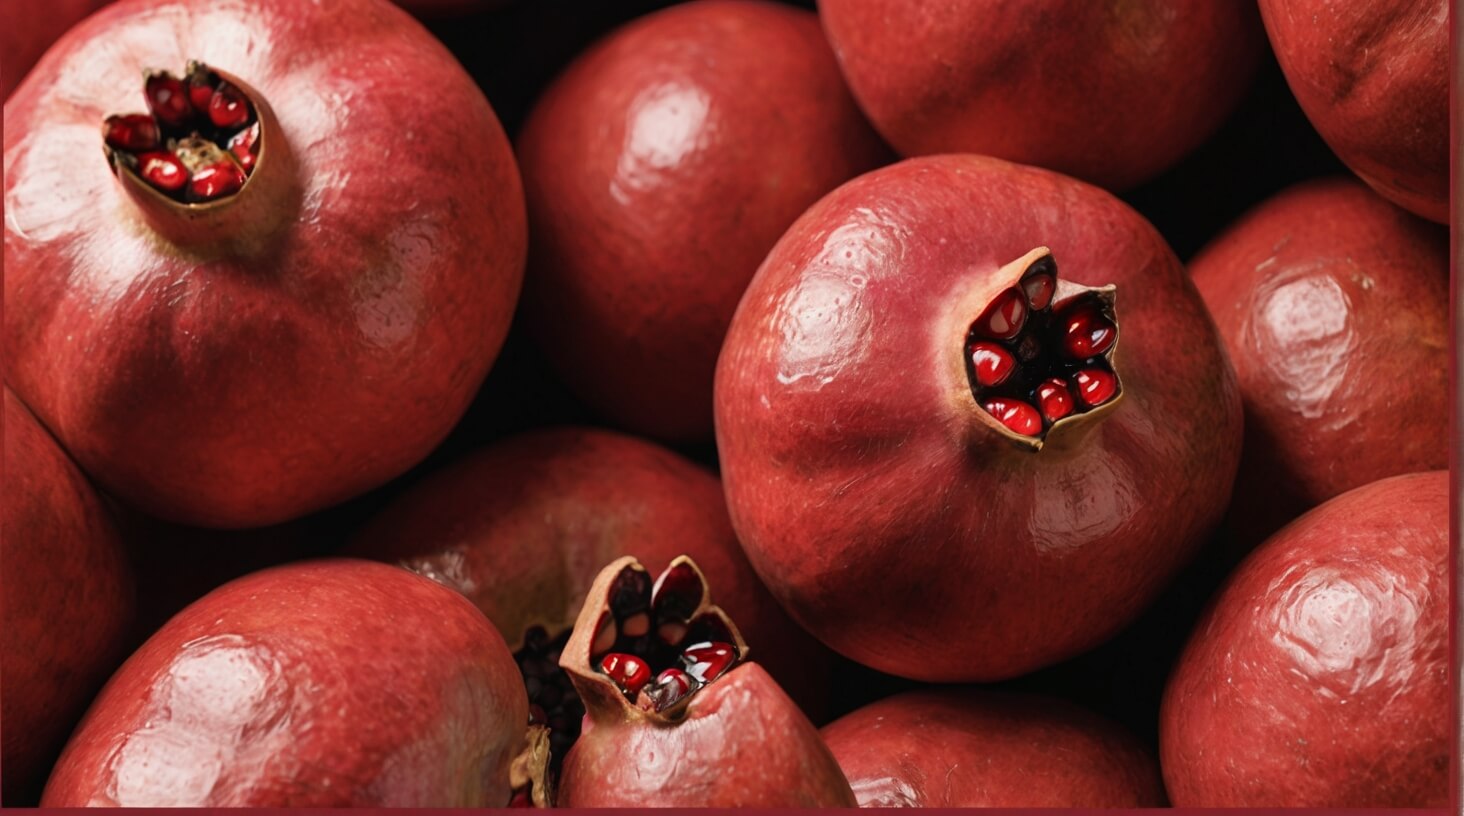 A close-up of fresh pomegranate seeds, highlighting the rich red color and the abundance of vitamins and minerals in pomegranate extract.